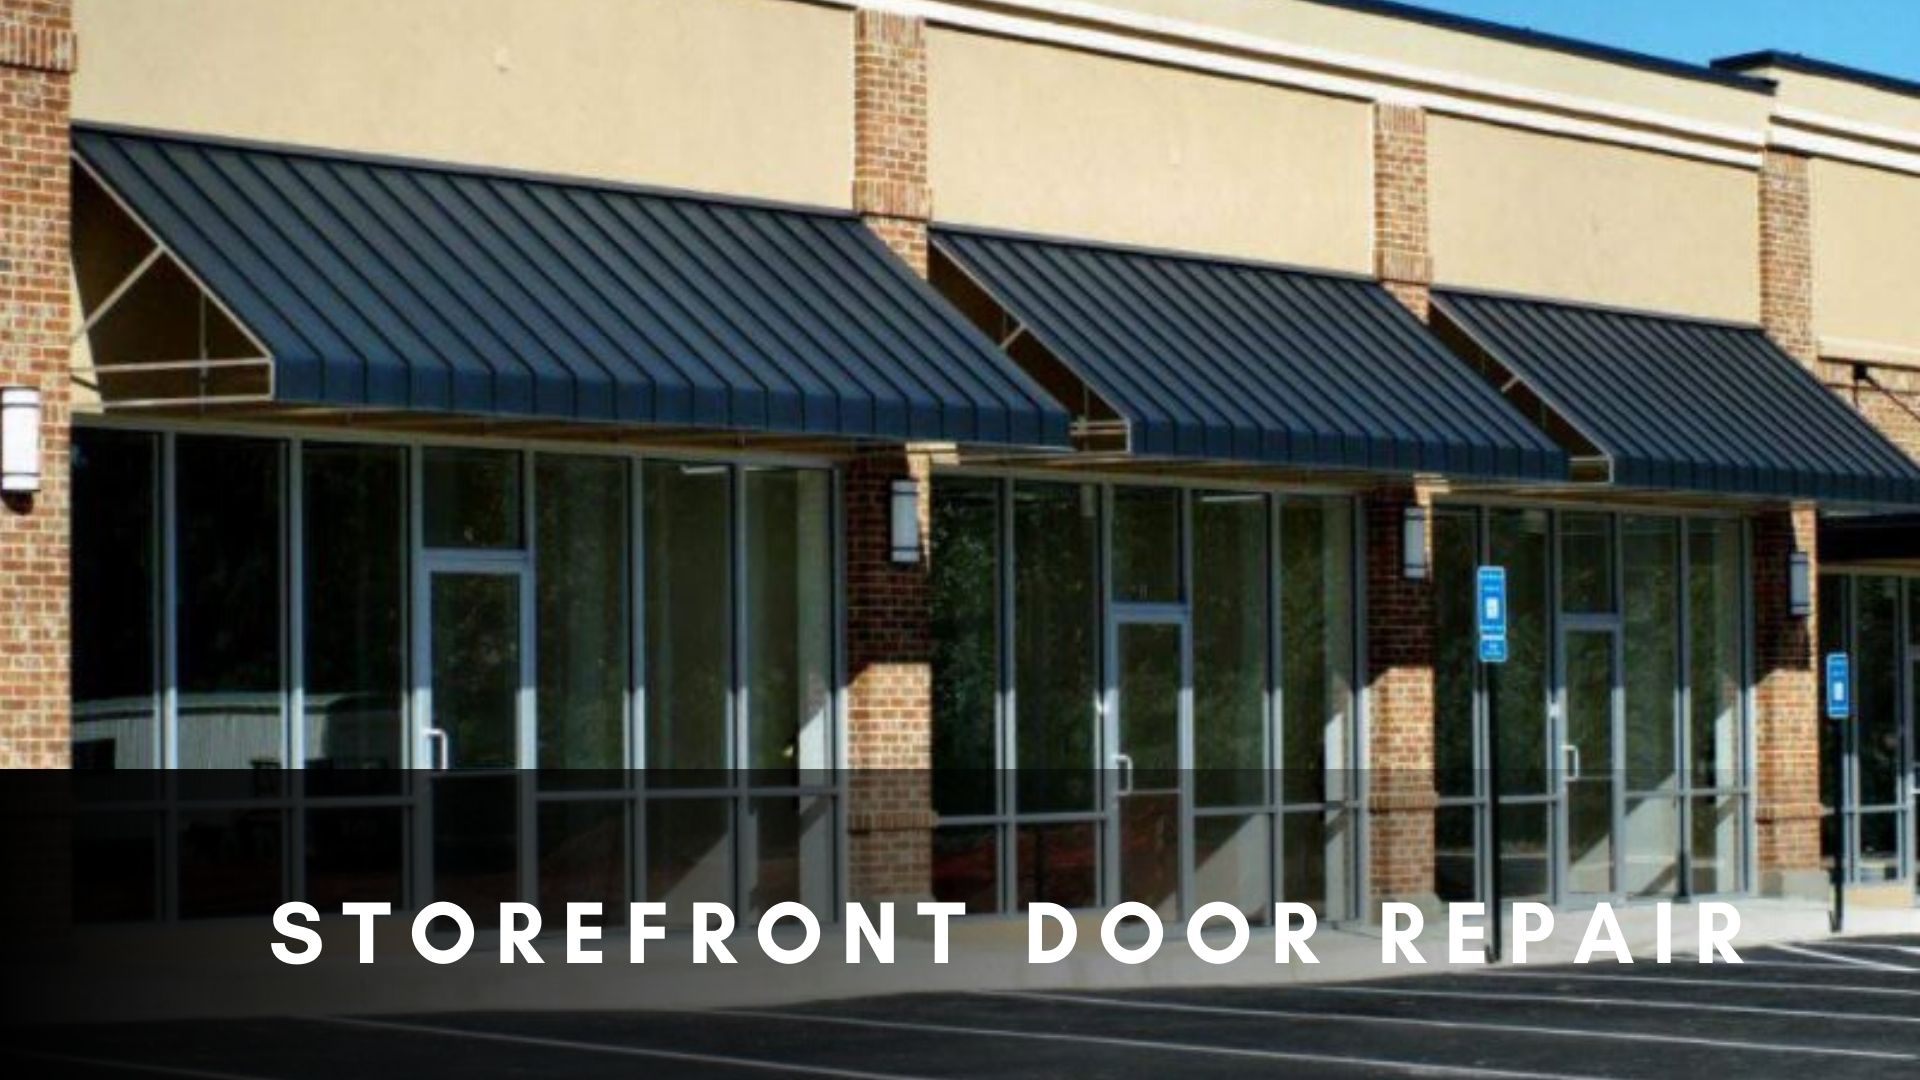 Tips for Choosing the Right Storefront Door Repair Service